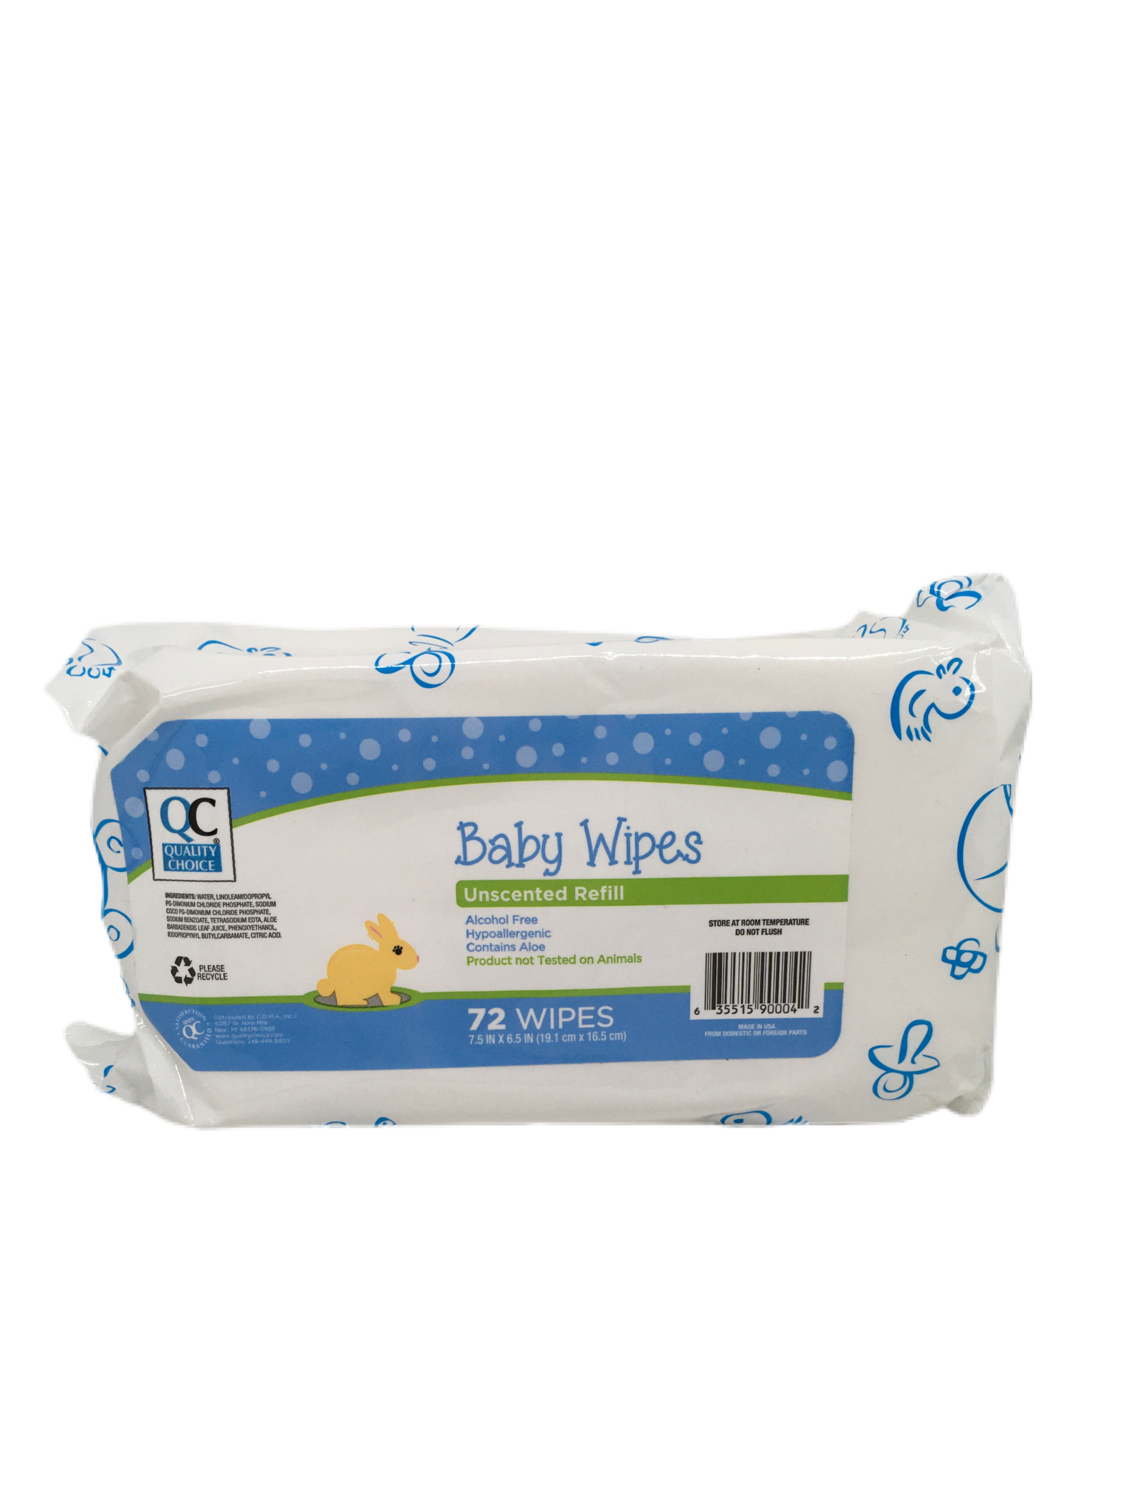 Baby Wipes QC